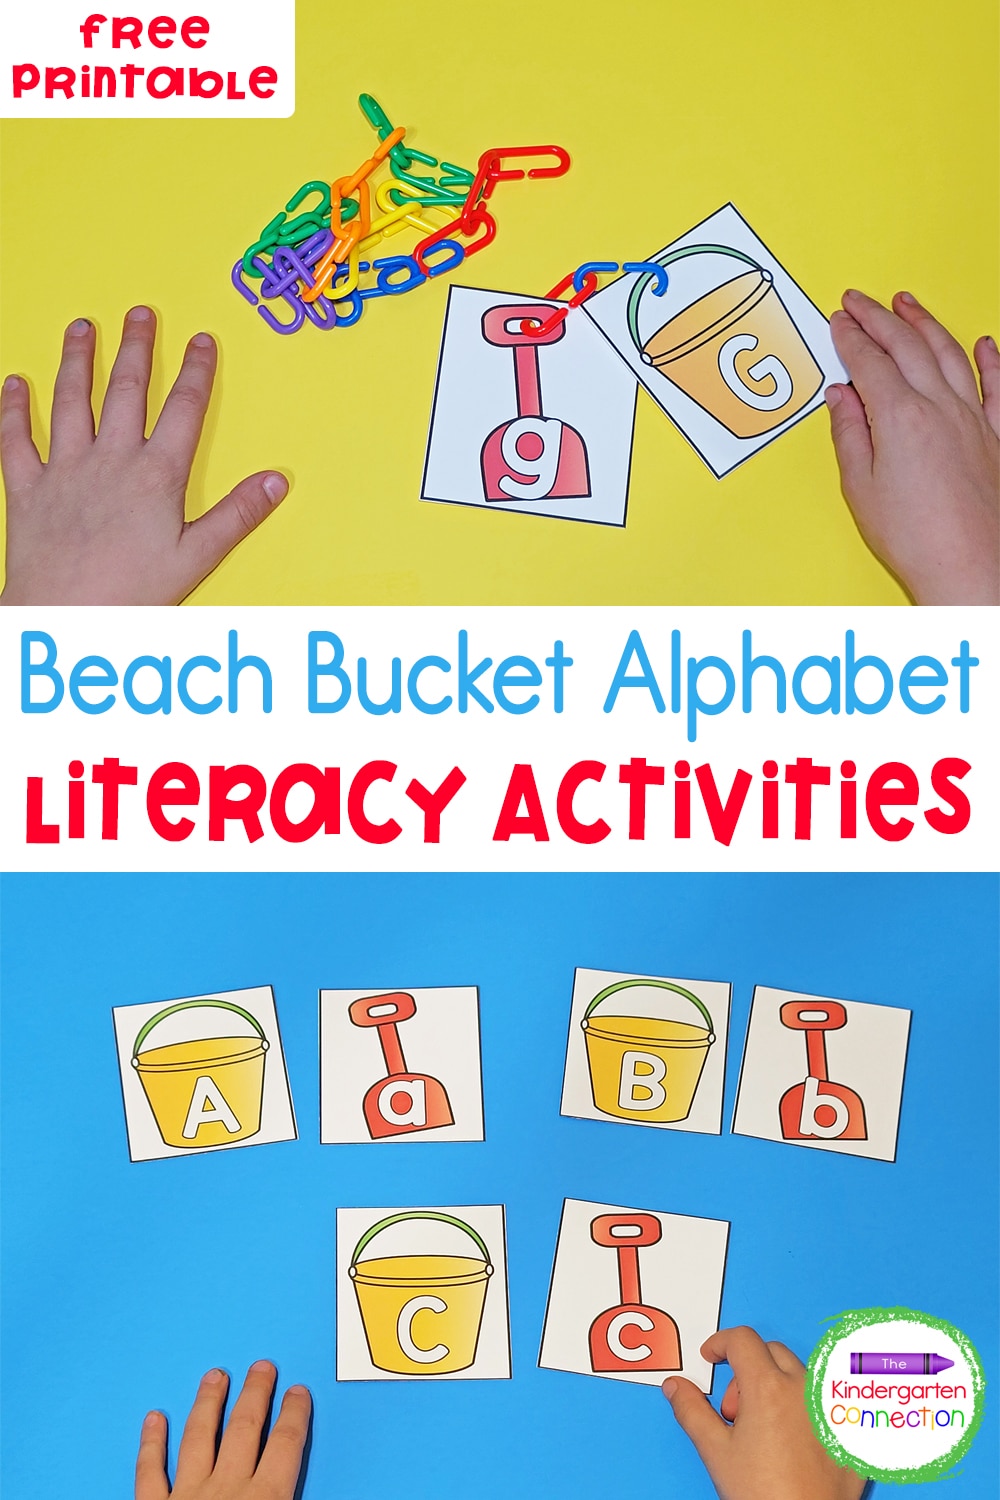 These free Beach Bucket Uppercase and Lowercase Letter activities are perfect for some beach-themed, summer learning fun!